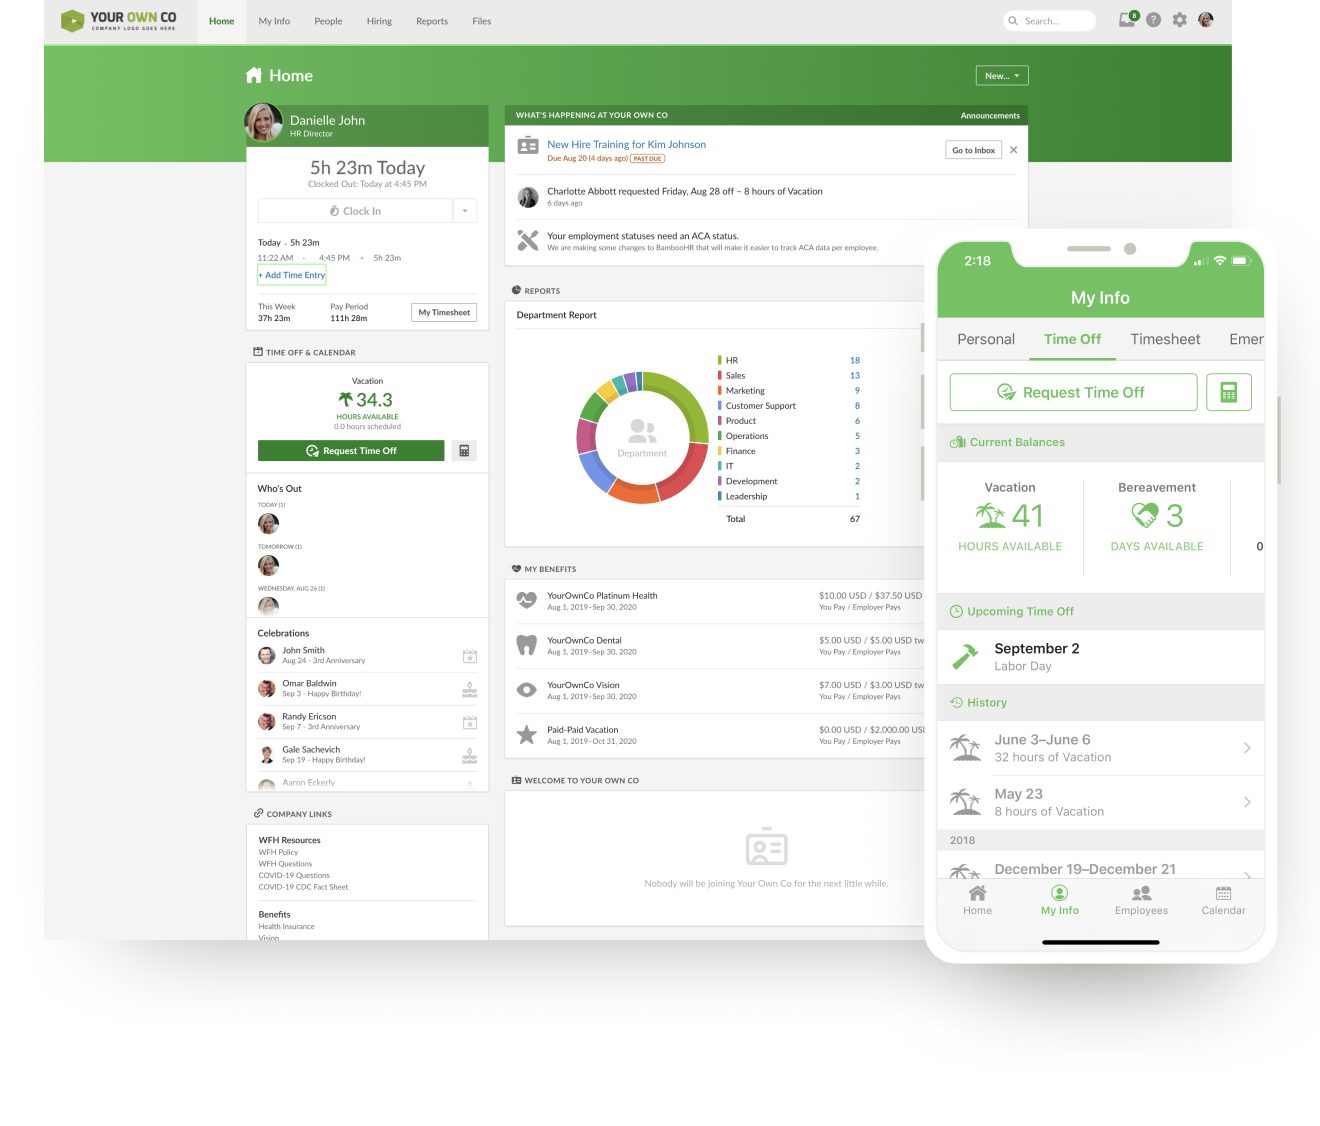 All-in-one HR Software - BambooHR Product Screenshot